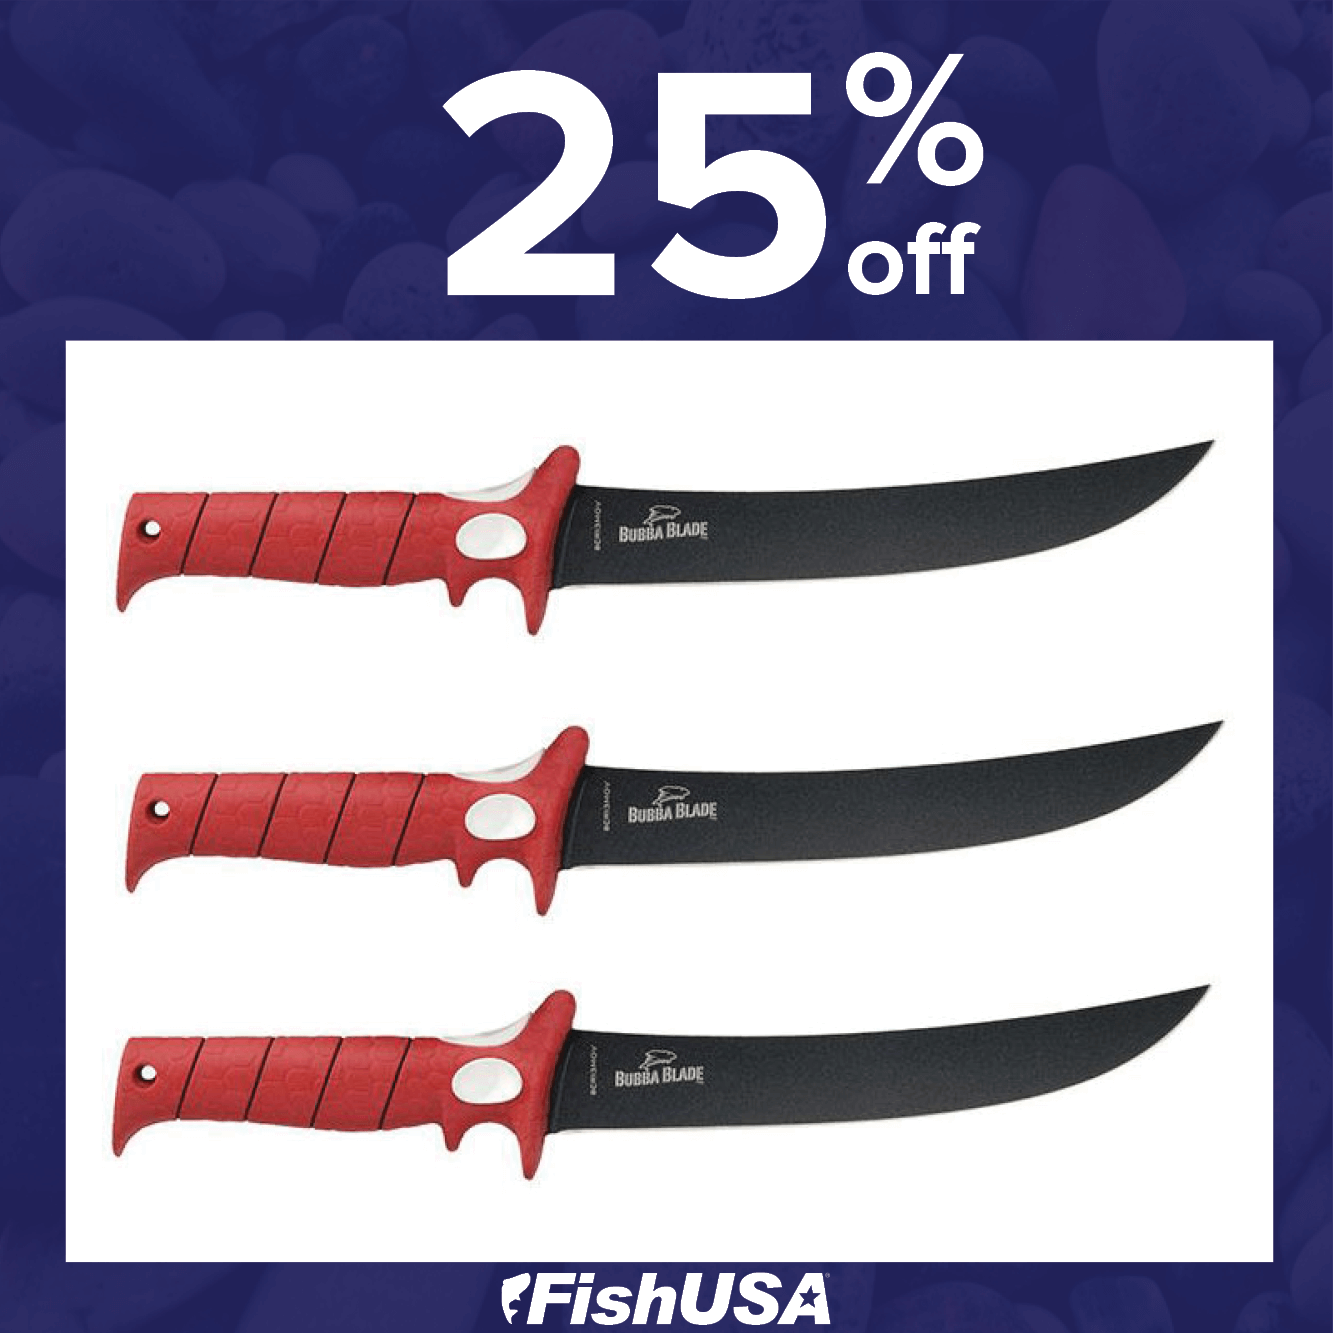 Save 25% on the Bubba Blade Flex Fillet Knife